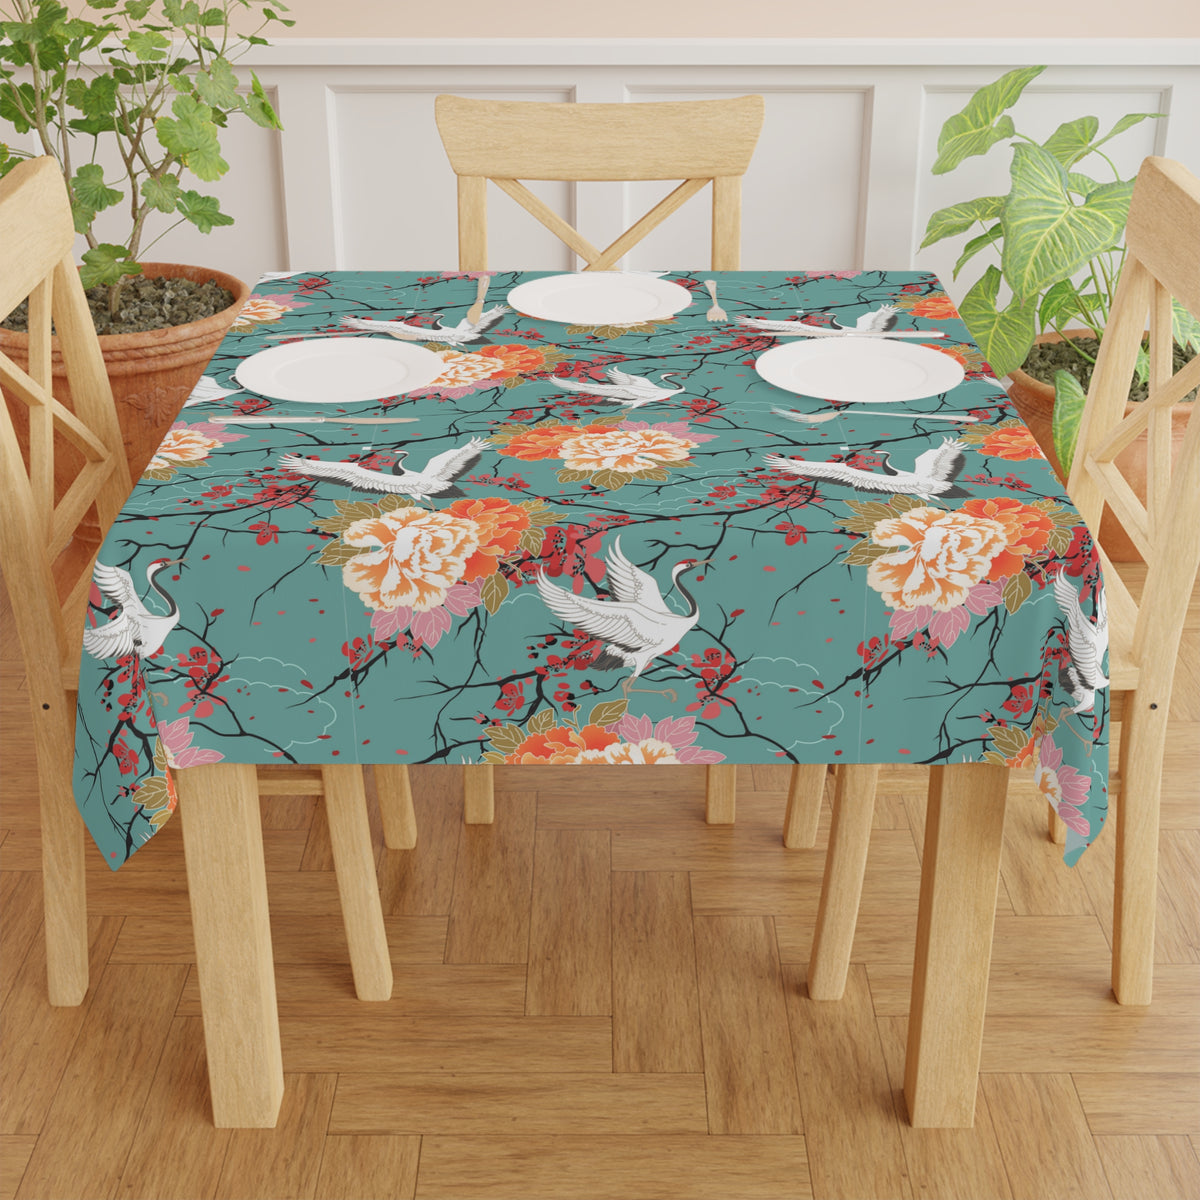 Decorative Tablecloth with Cherry and Crane Design, Durable Polyester (55.1&quot; x 55.1&quot;)